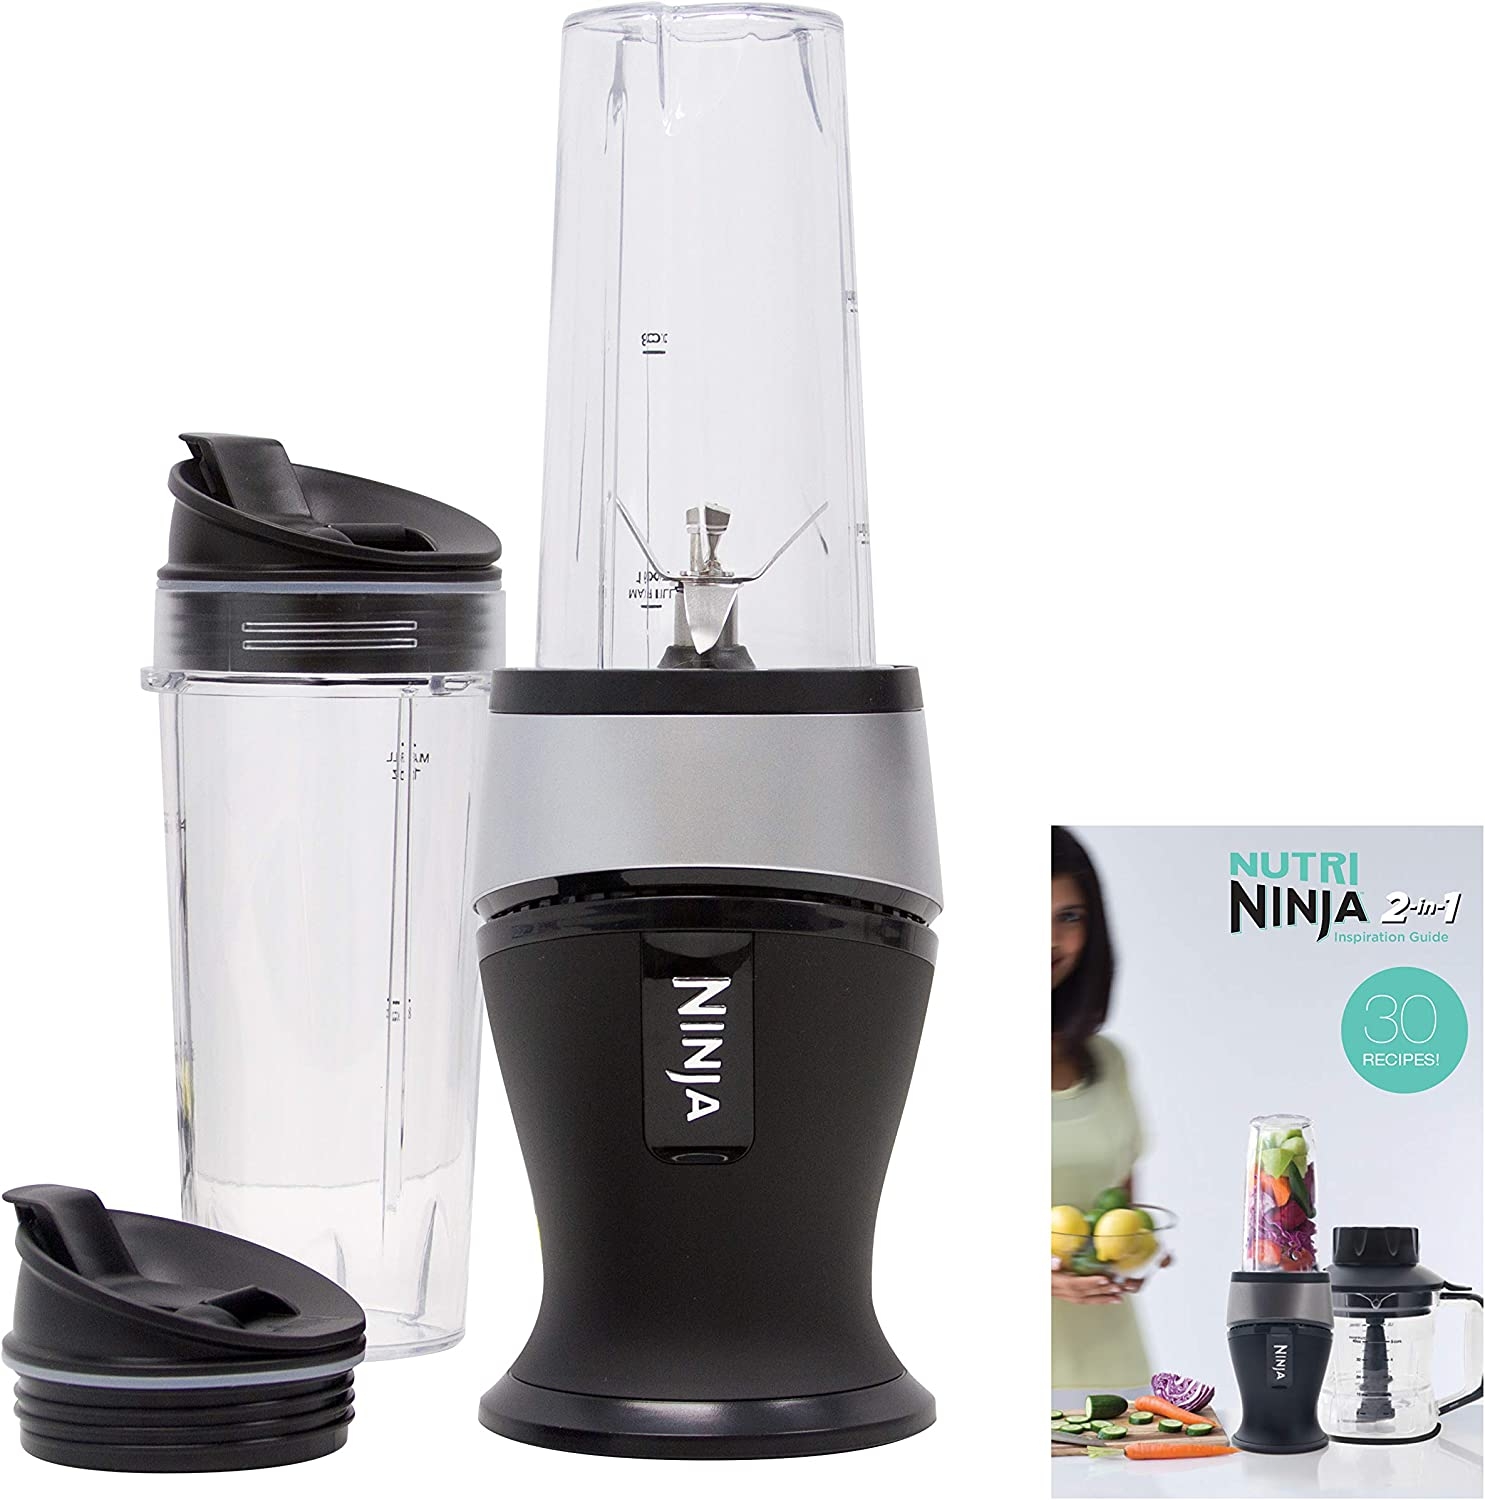 Ninja Personal Blender for Shakes, Smoothies, Food Prep, and Frozen Blending with 700-Watt Base and (2) 16-Ounce Cups with Spout